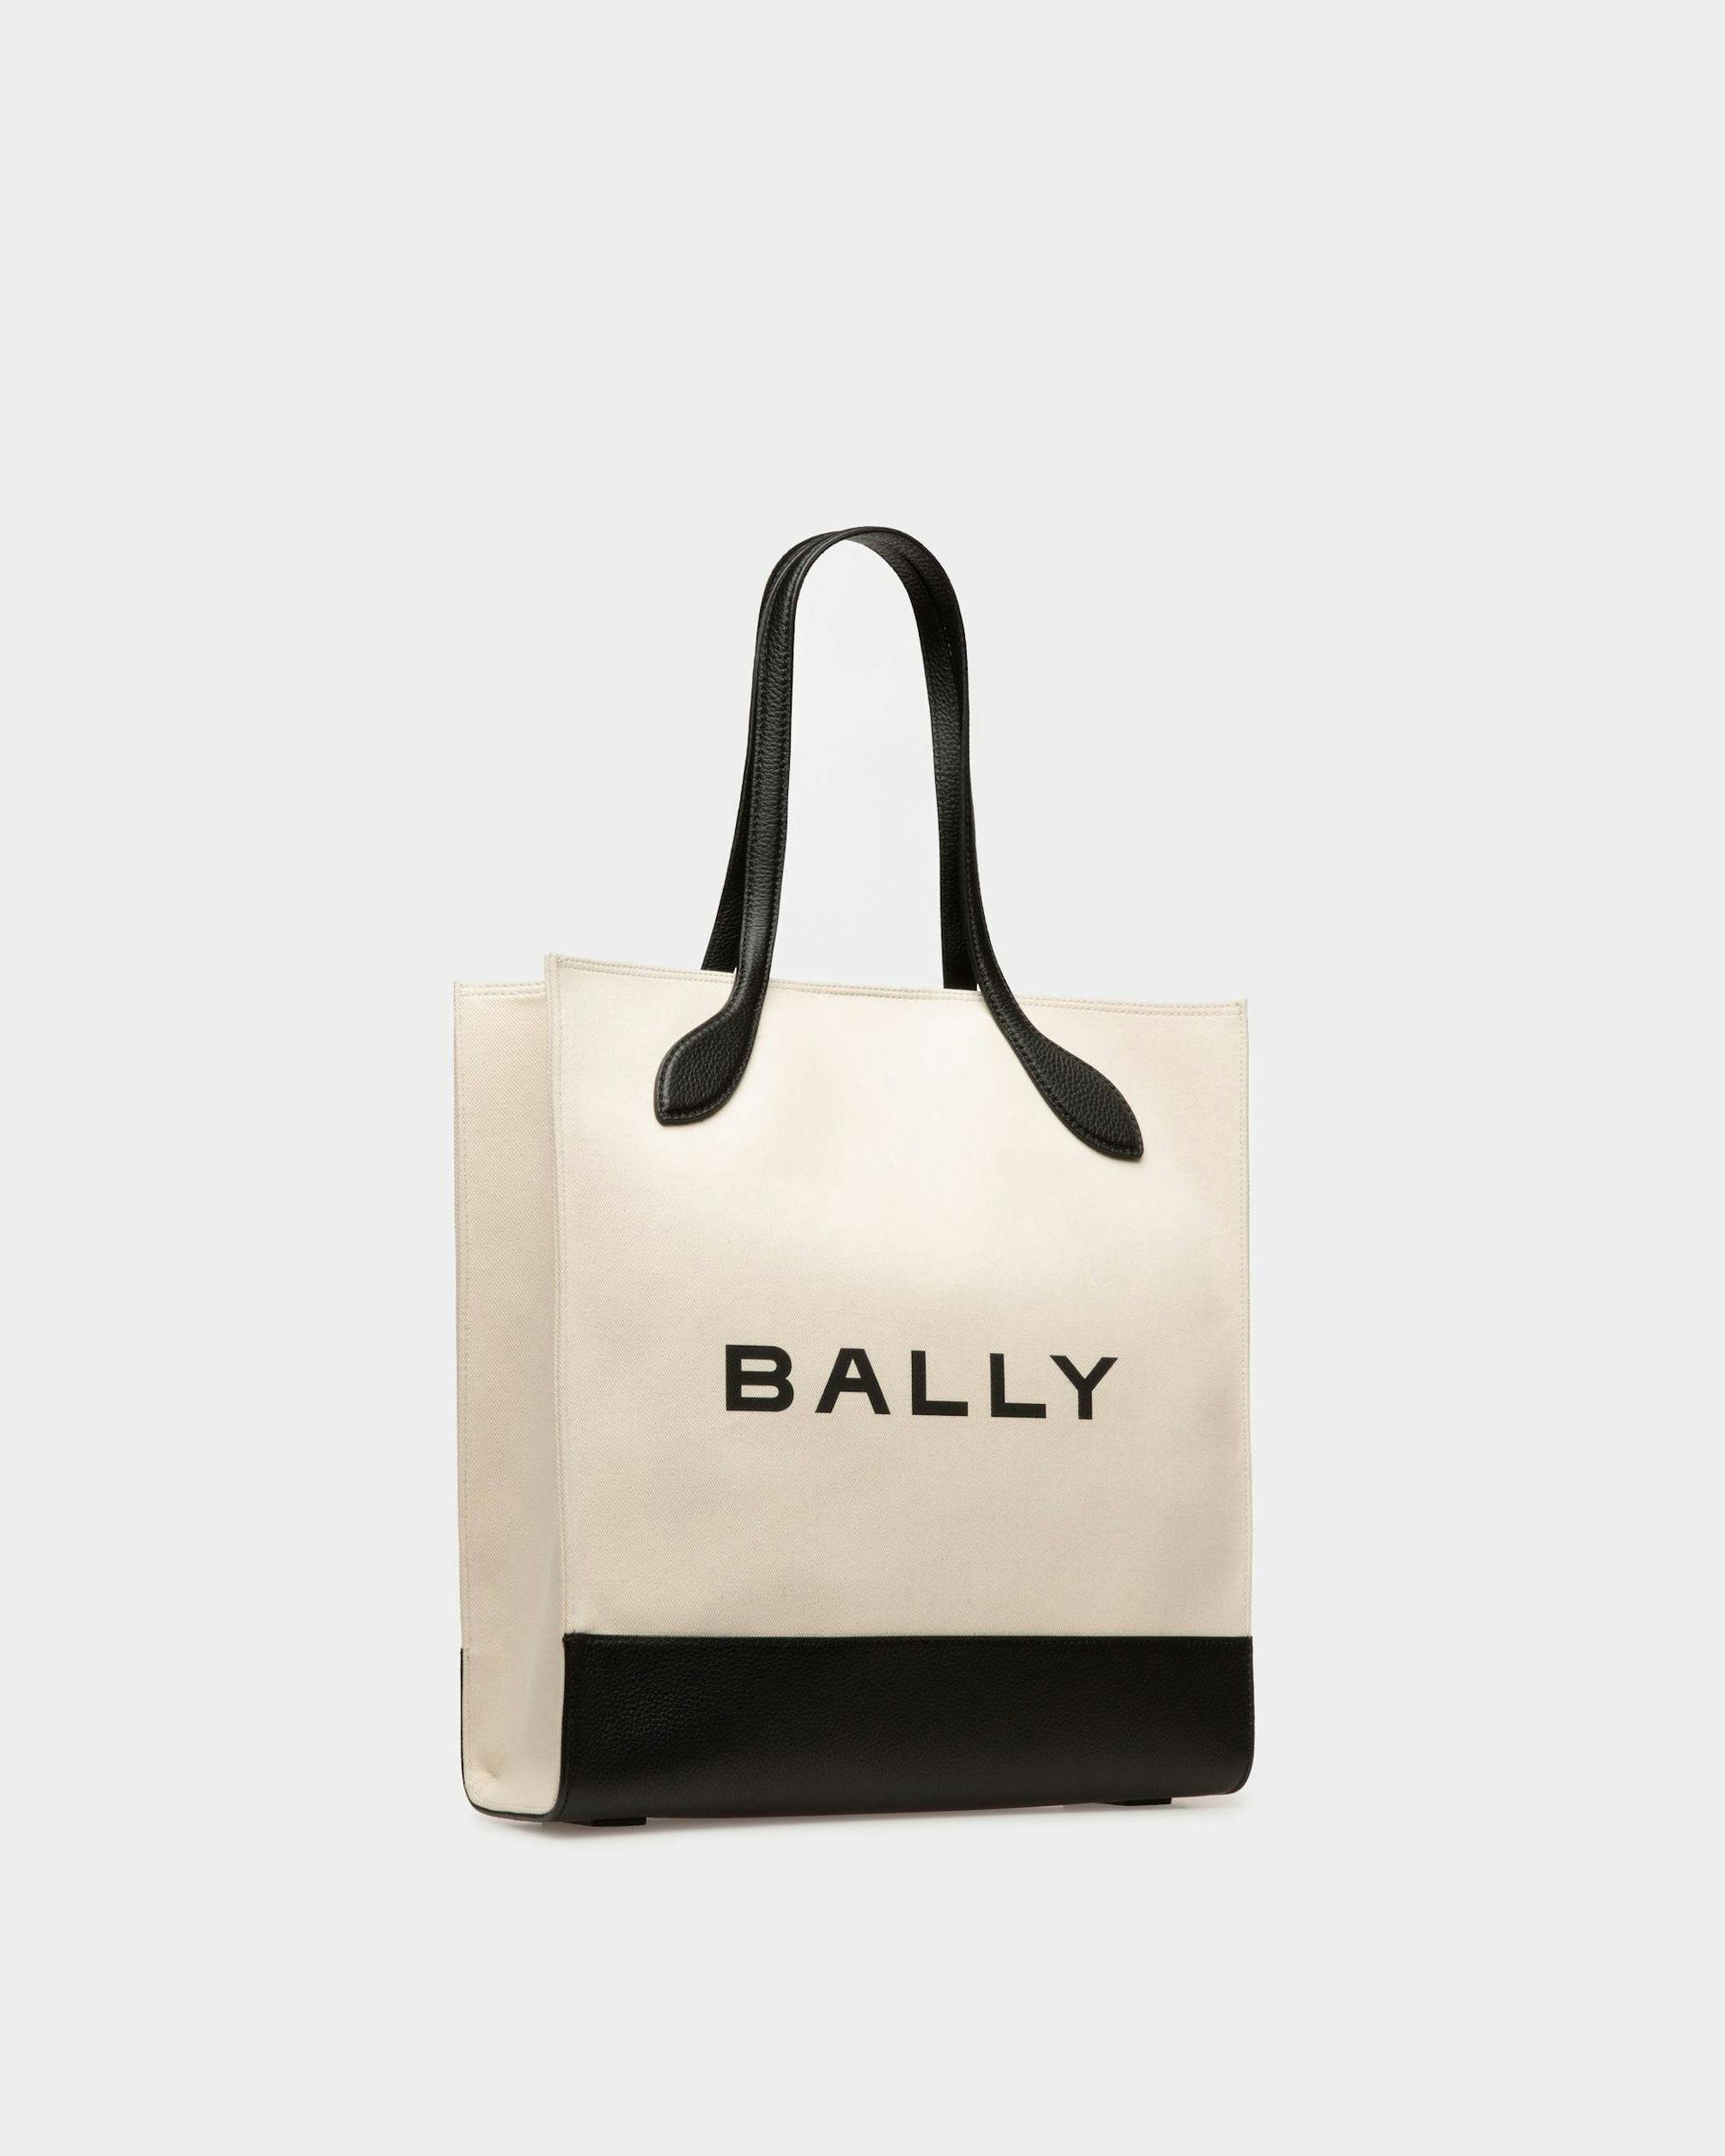 Women's Bar Tote Bag In Natural And Black Fabric | Bally | Still Life 3/4 Front